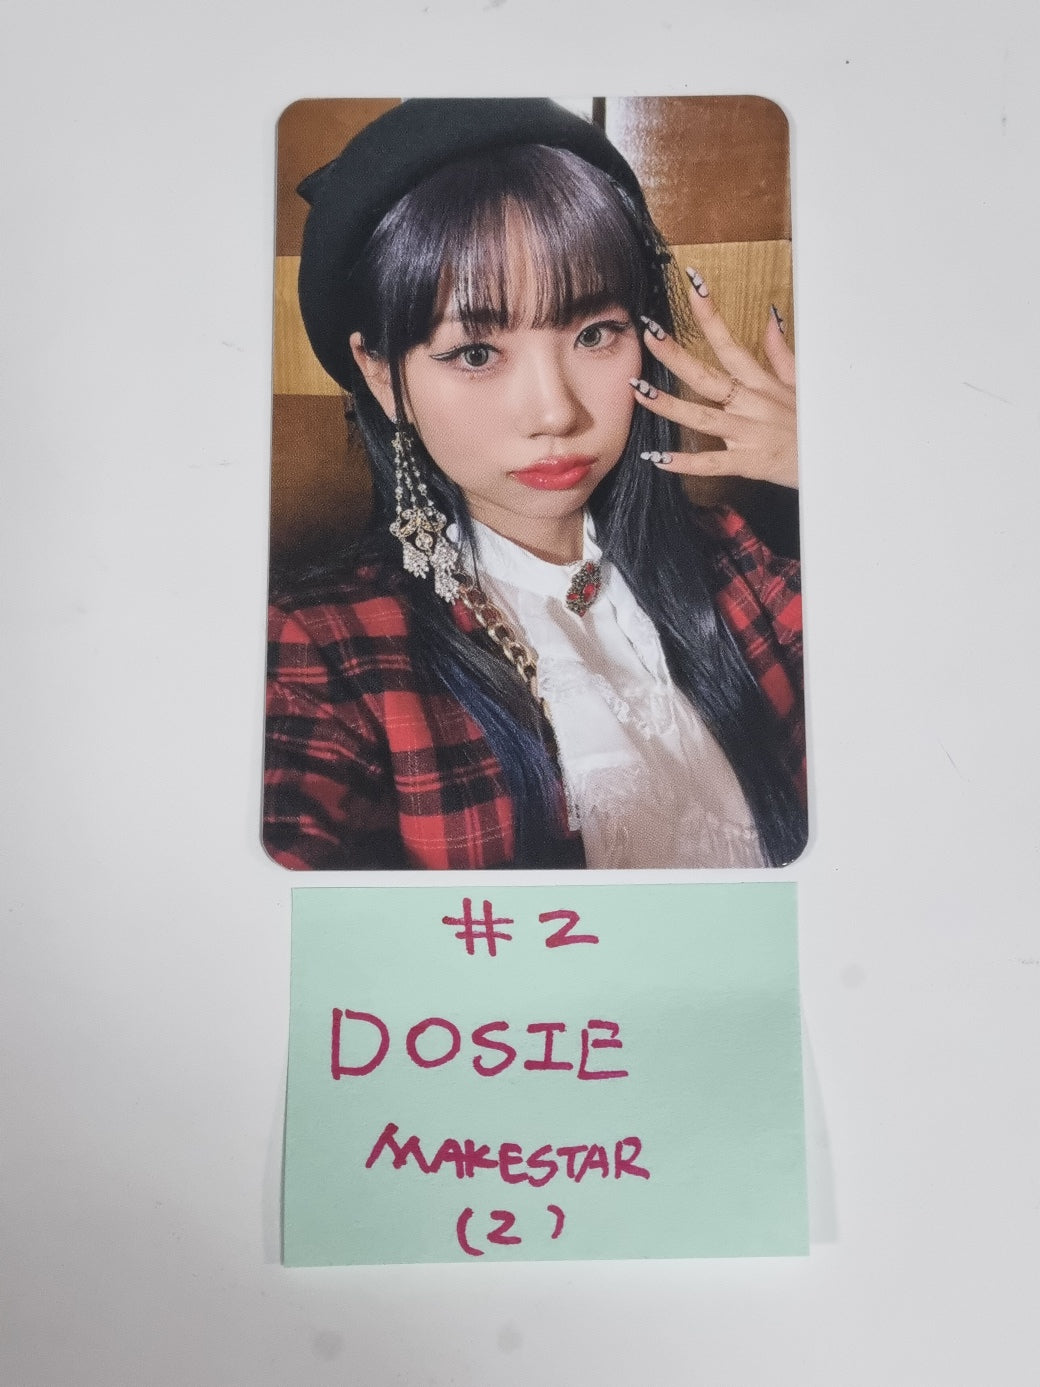 PURPLE KISS "Cabin Fever" - Makestar Fansign Event Photocard Round 3